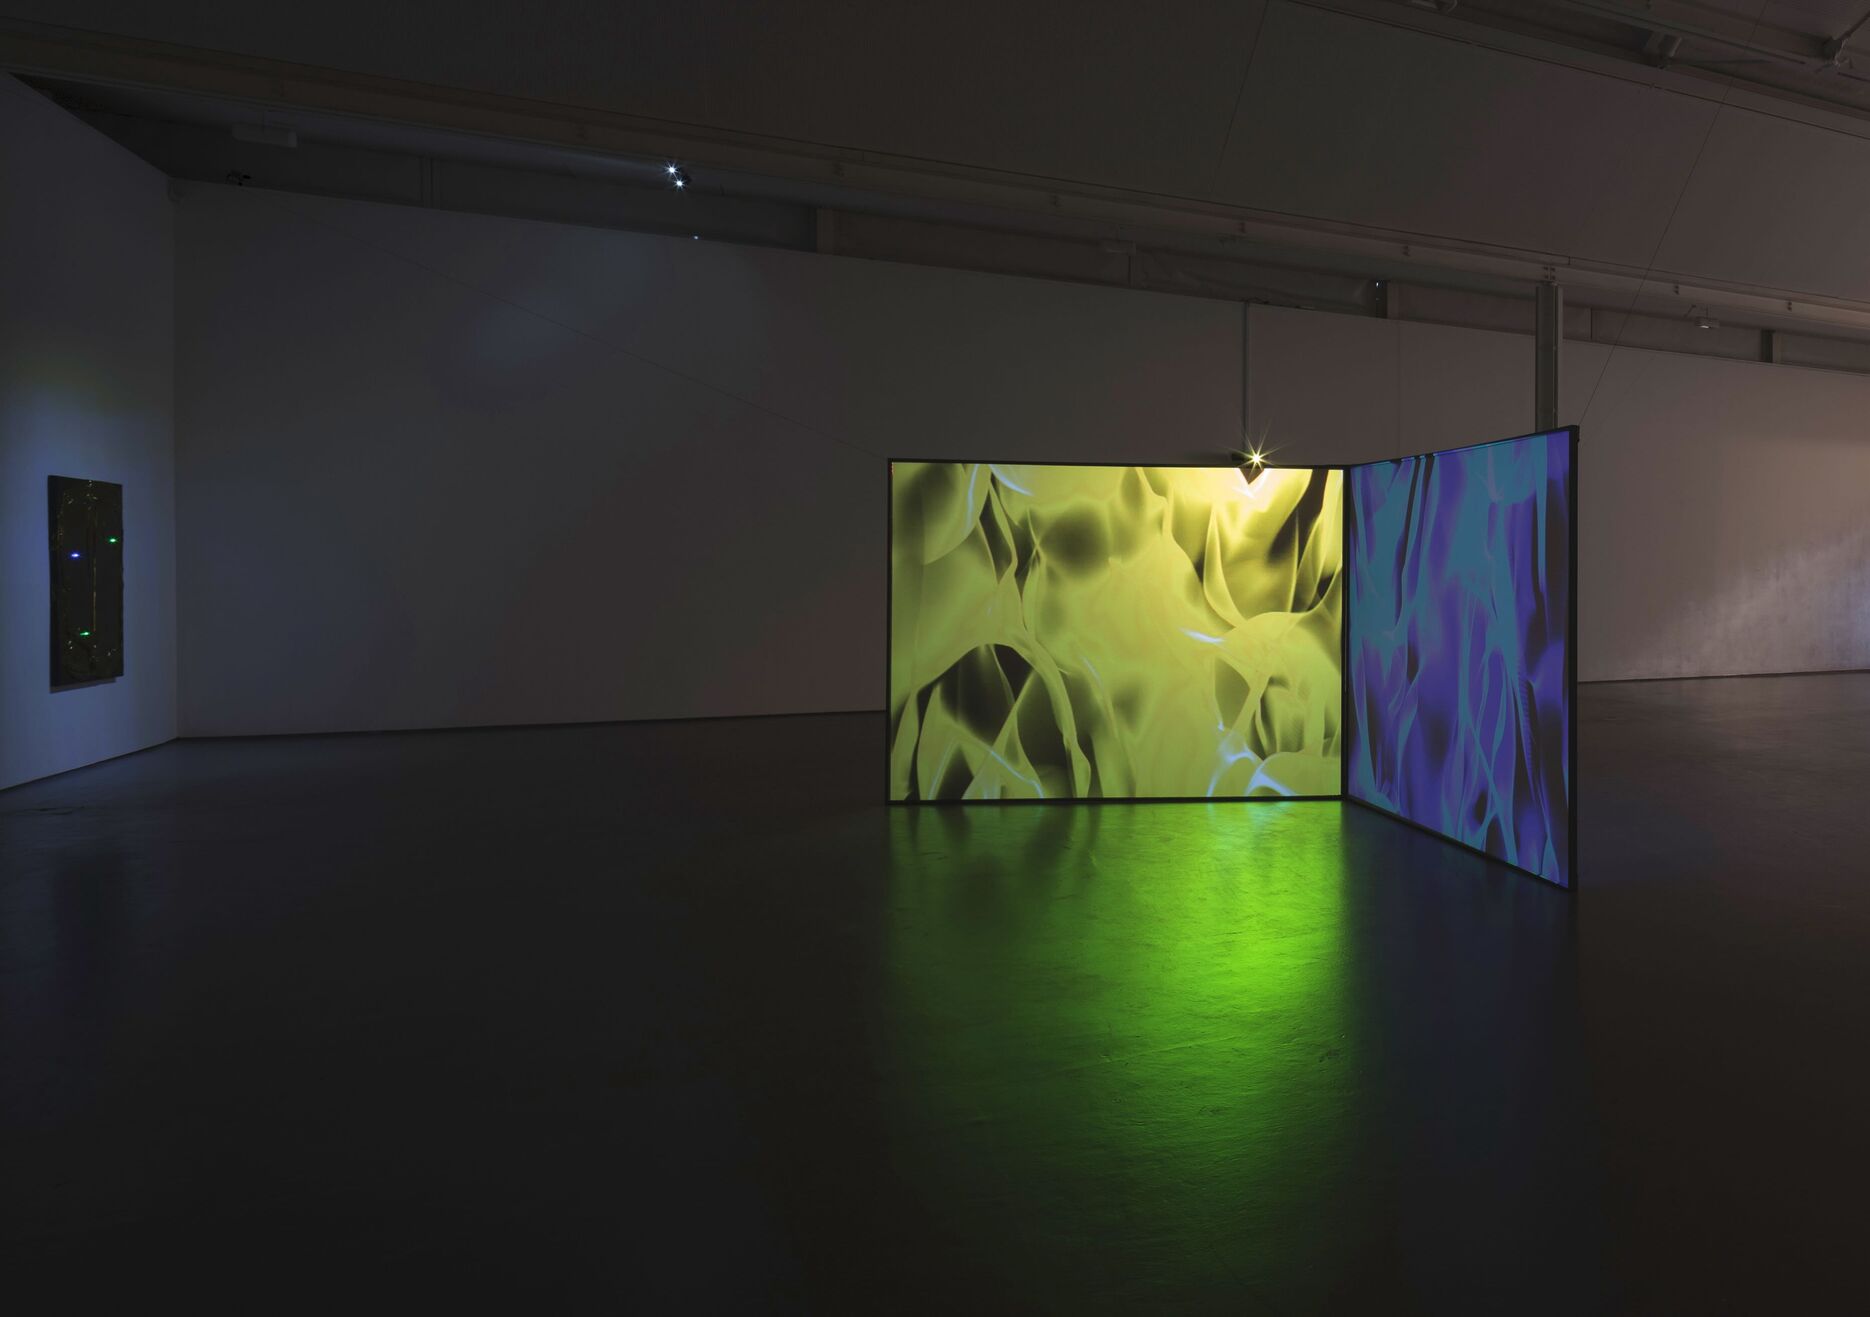 From Florian & Michael Quistrebert's exhibition. Two large screens show abstract patterns in yellow and blue.